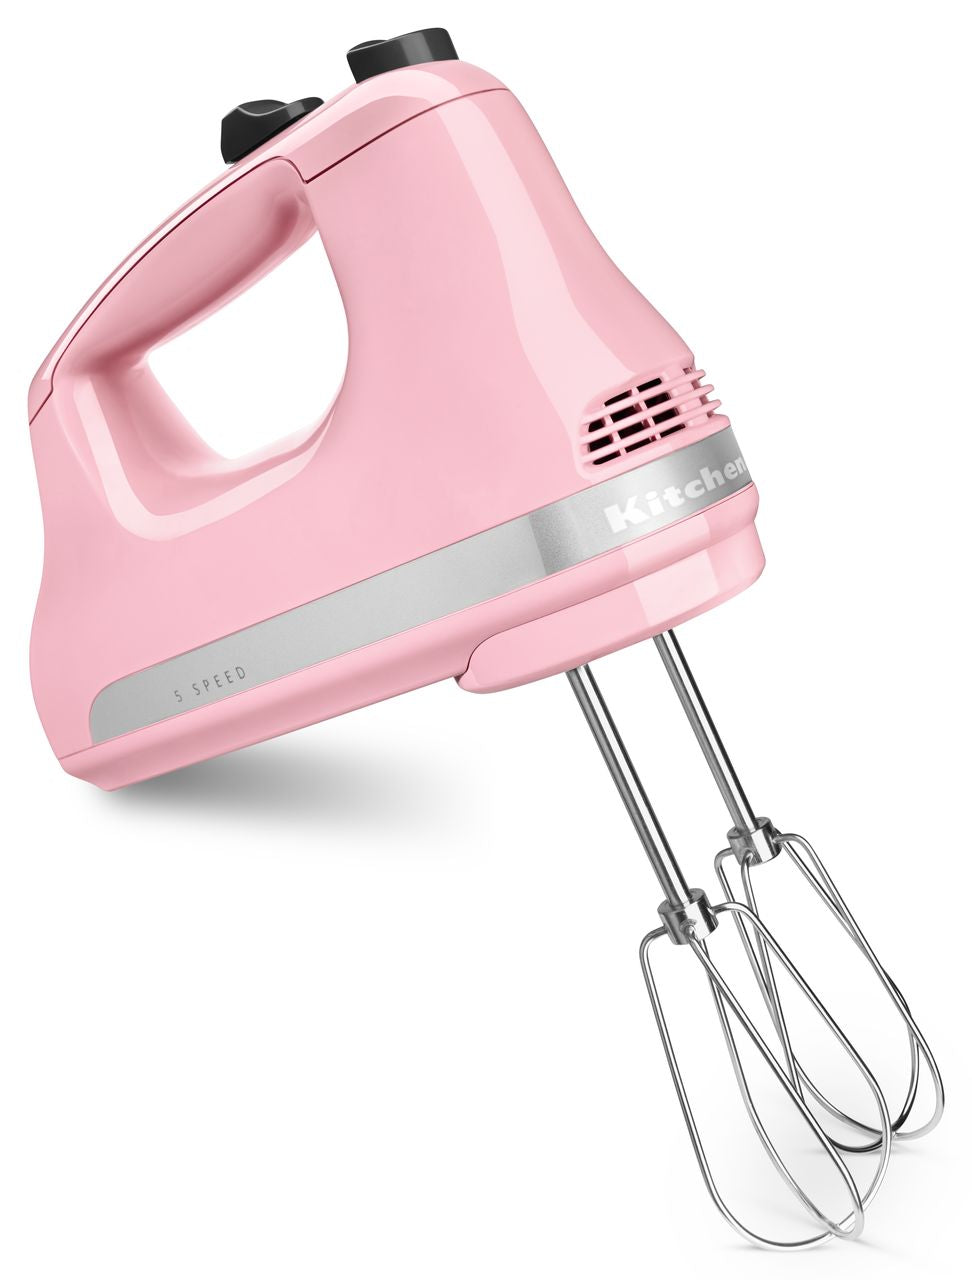 new kitchenaid mixer in feather pink !!!💕🌸 the cabbage patch kid